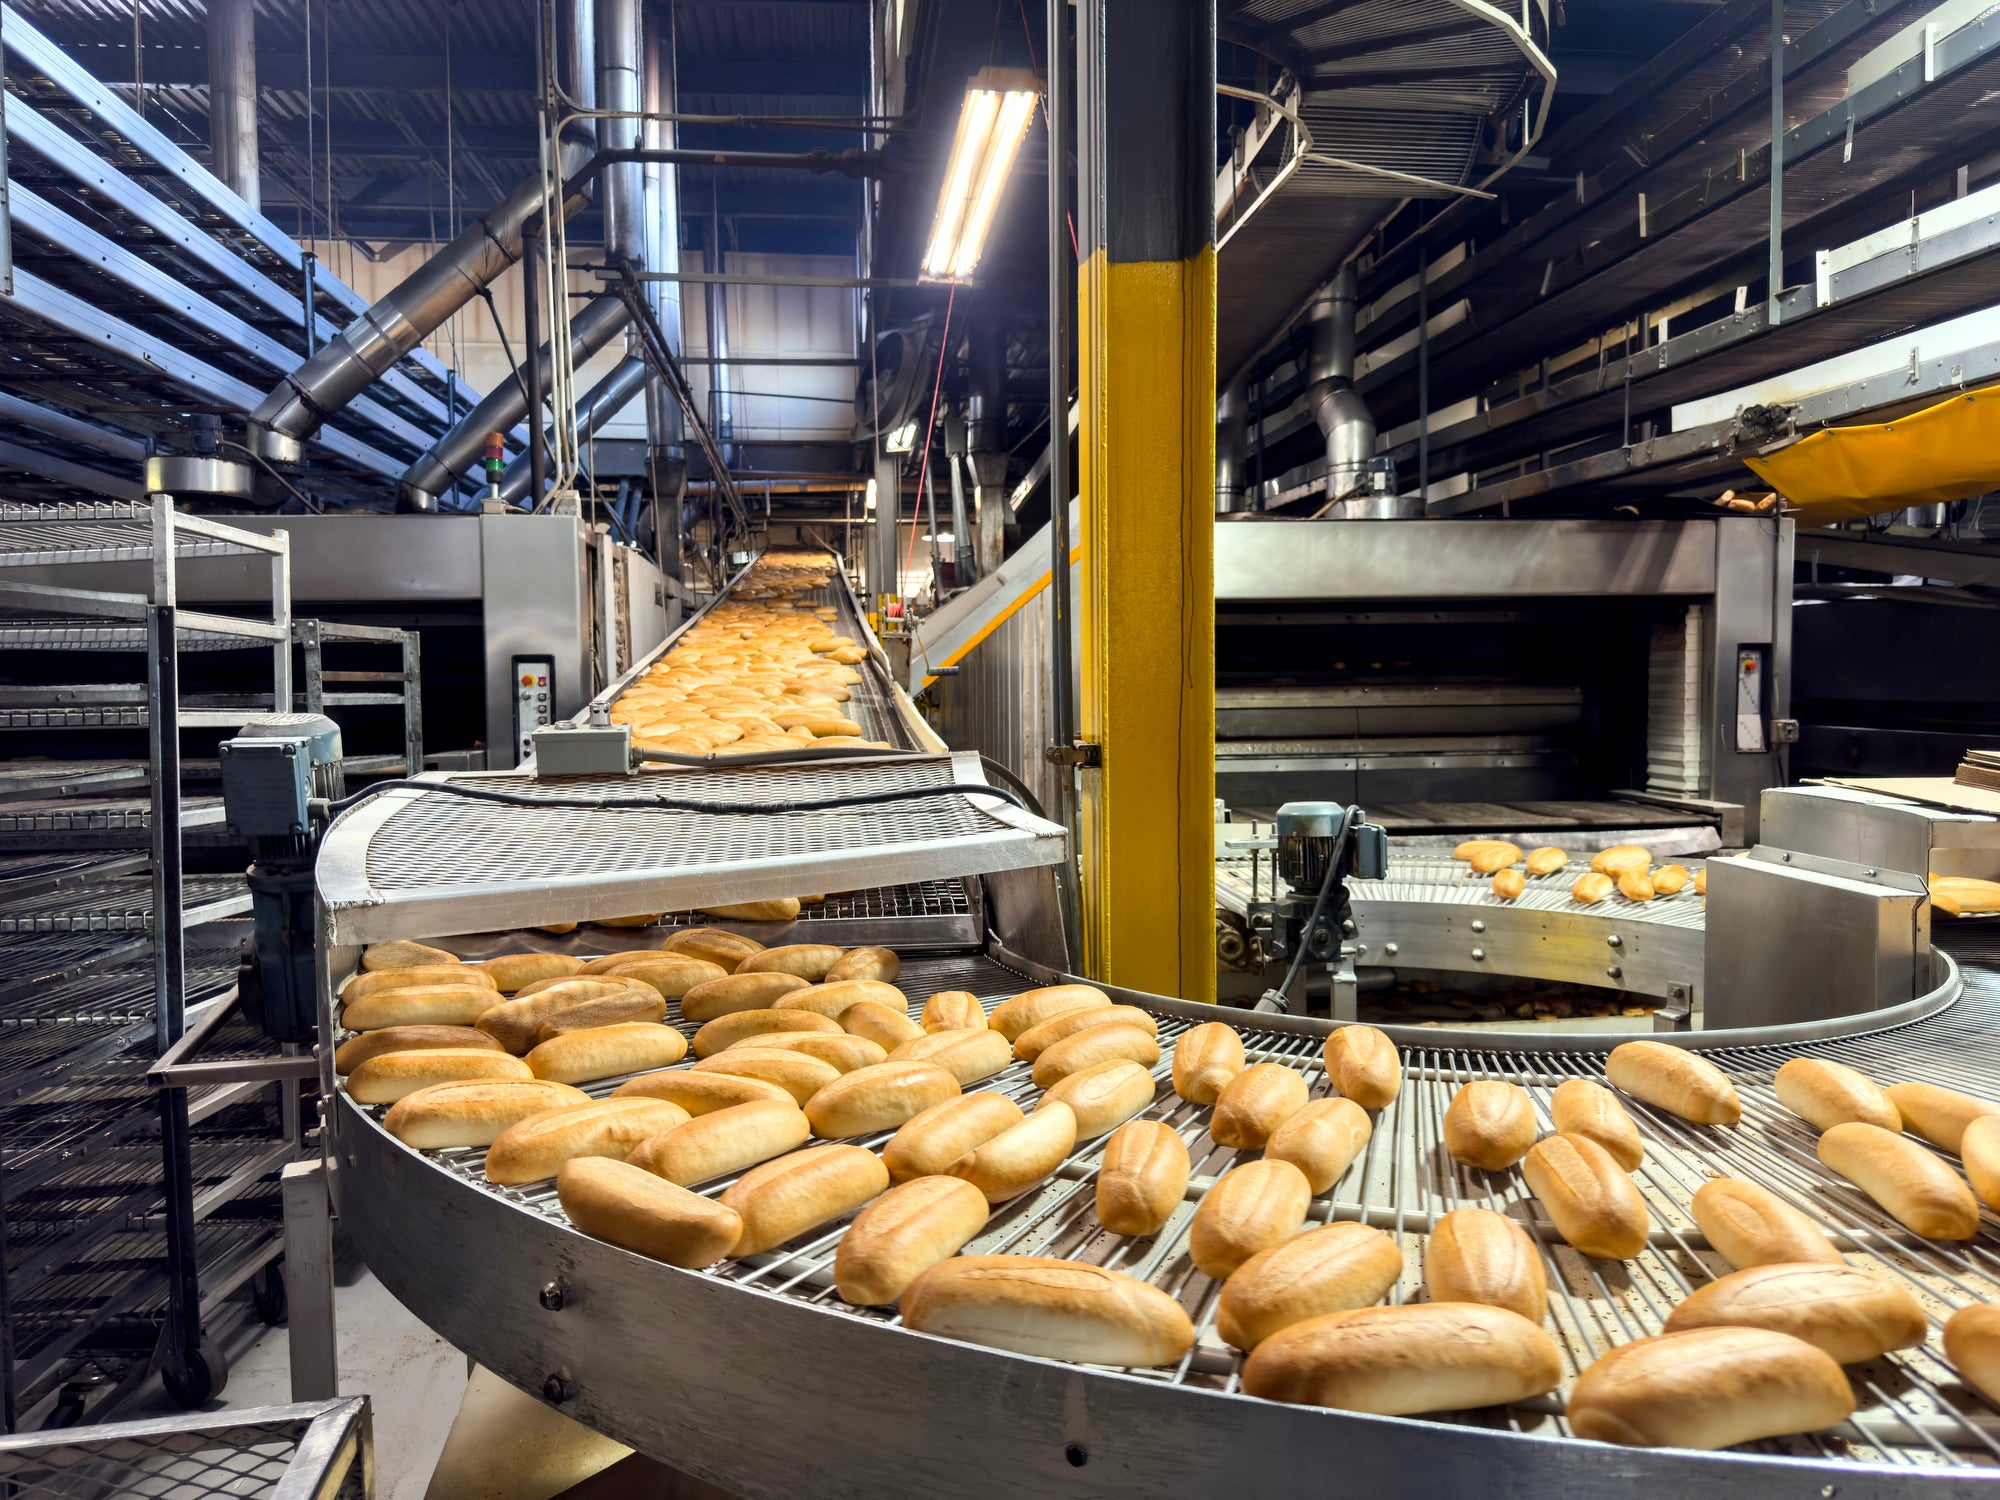 Many loaves of bread moving down a conveyor belt.